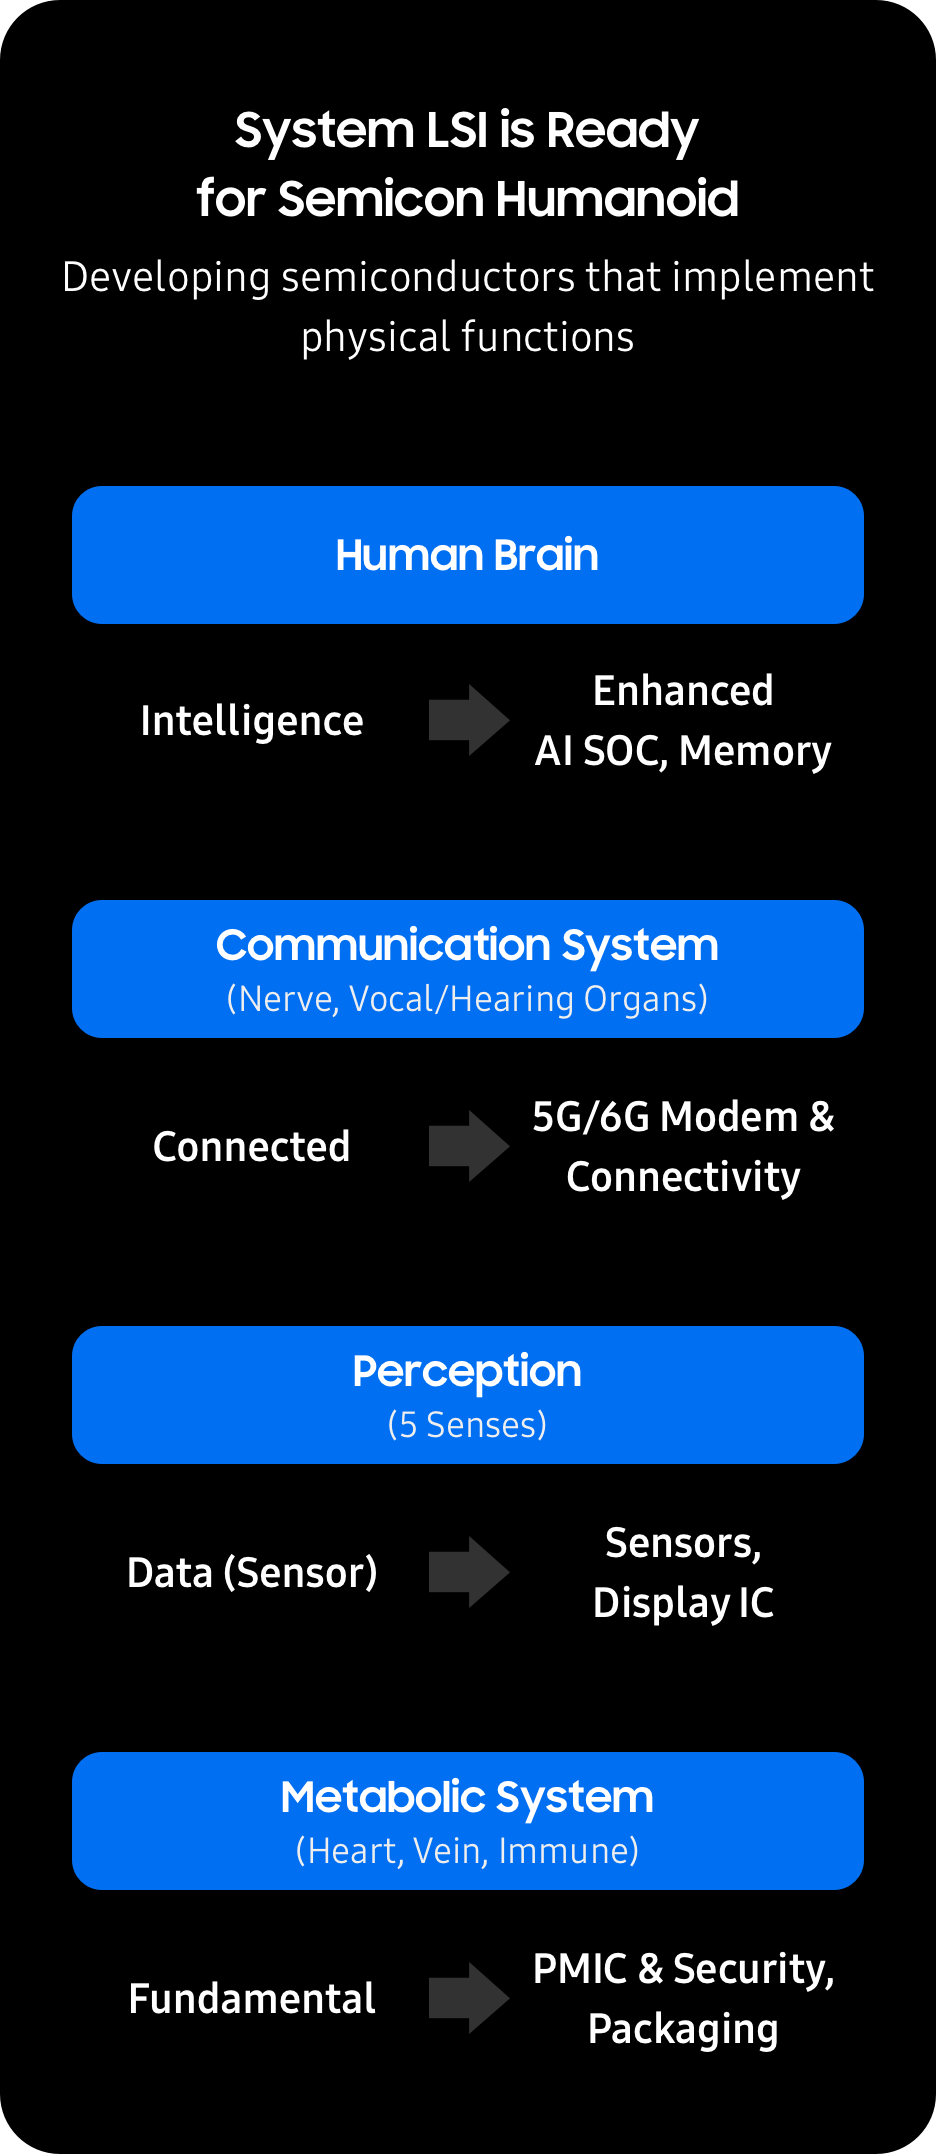 Samsung Semiconductor System LSI is ready for semiconductor humanoids by developing semiconductors that implement physical functions.